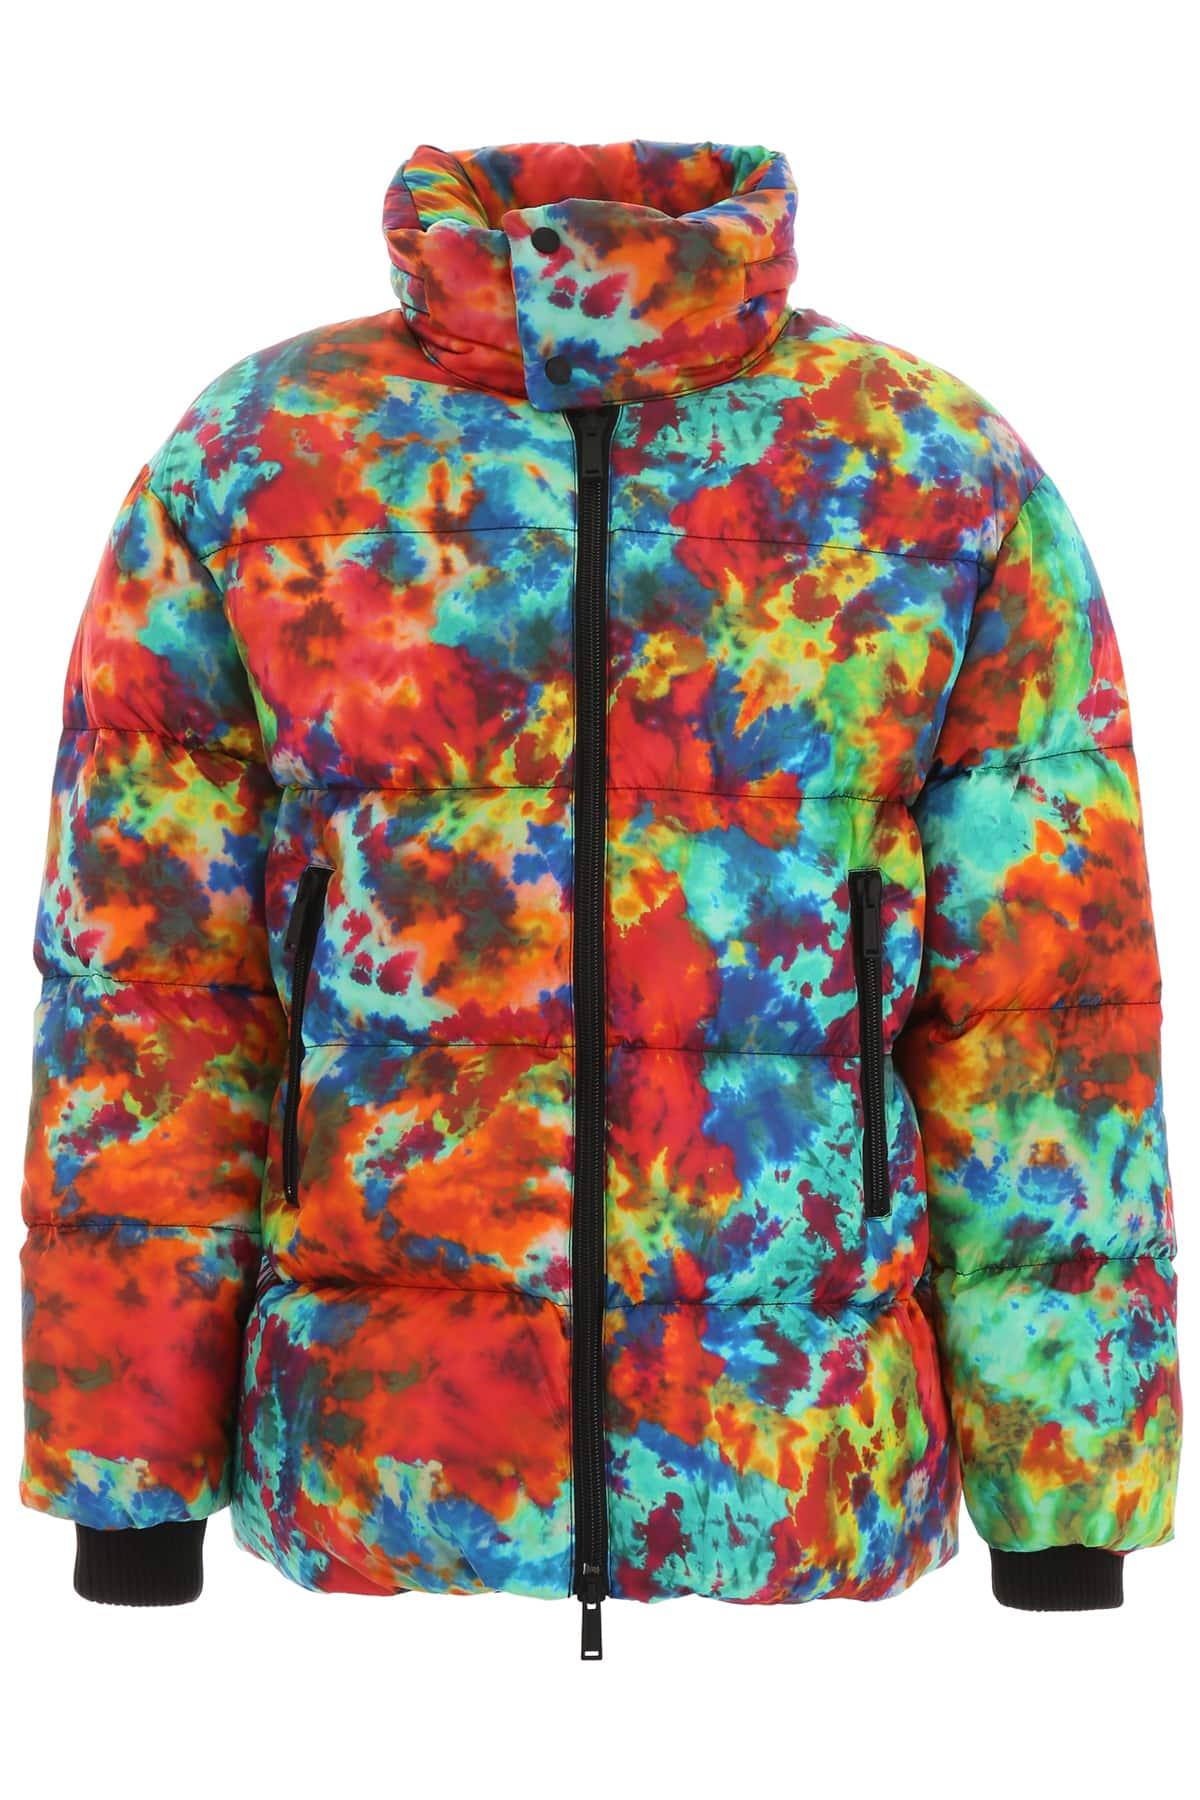 DSquared² Synthetic Tie-dye Puffer Jacket in Red,Yellow,Blue (Blue) for ...